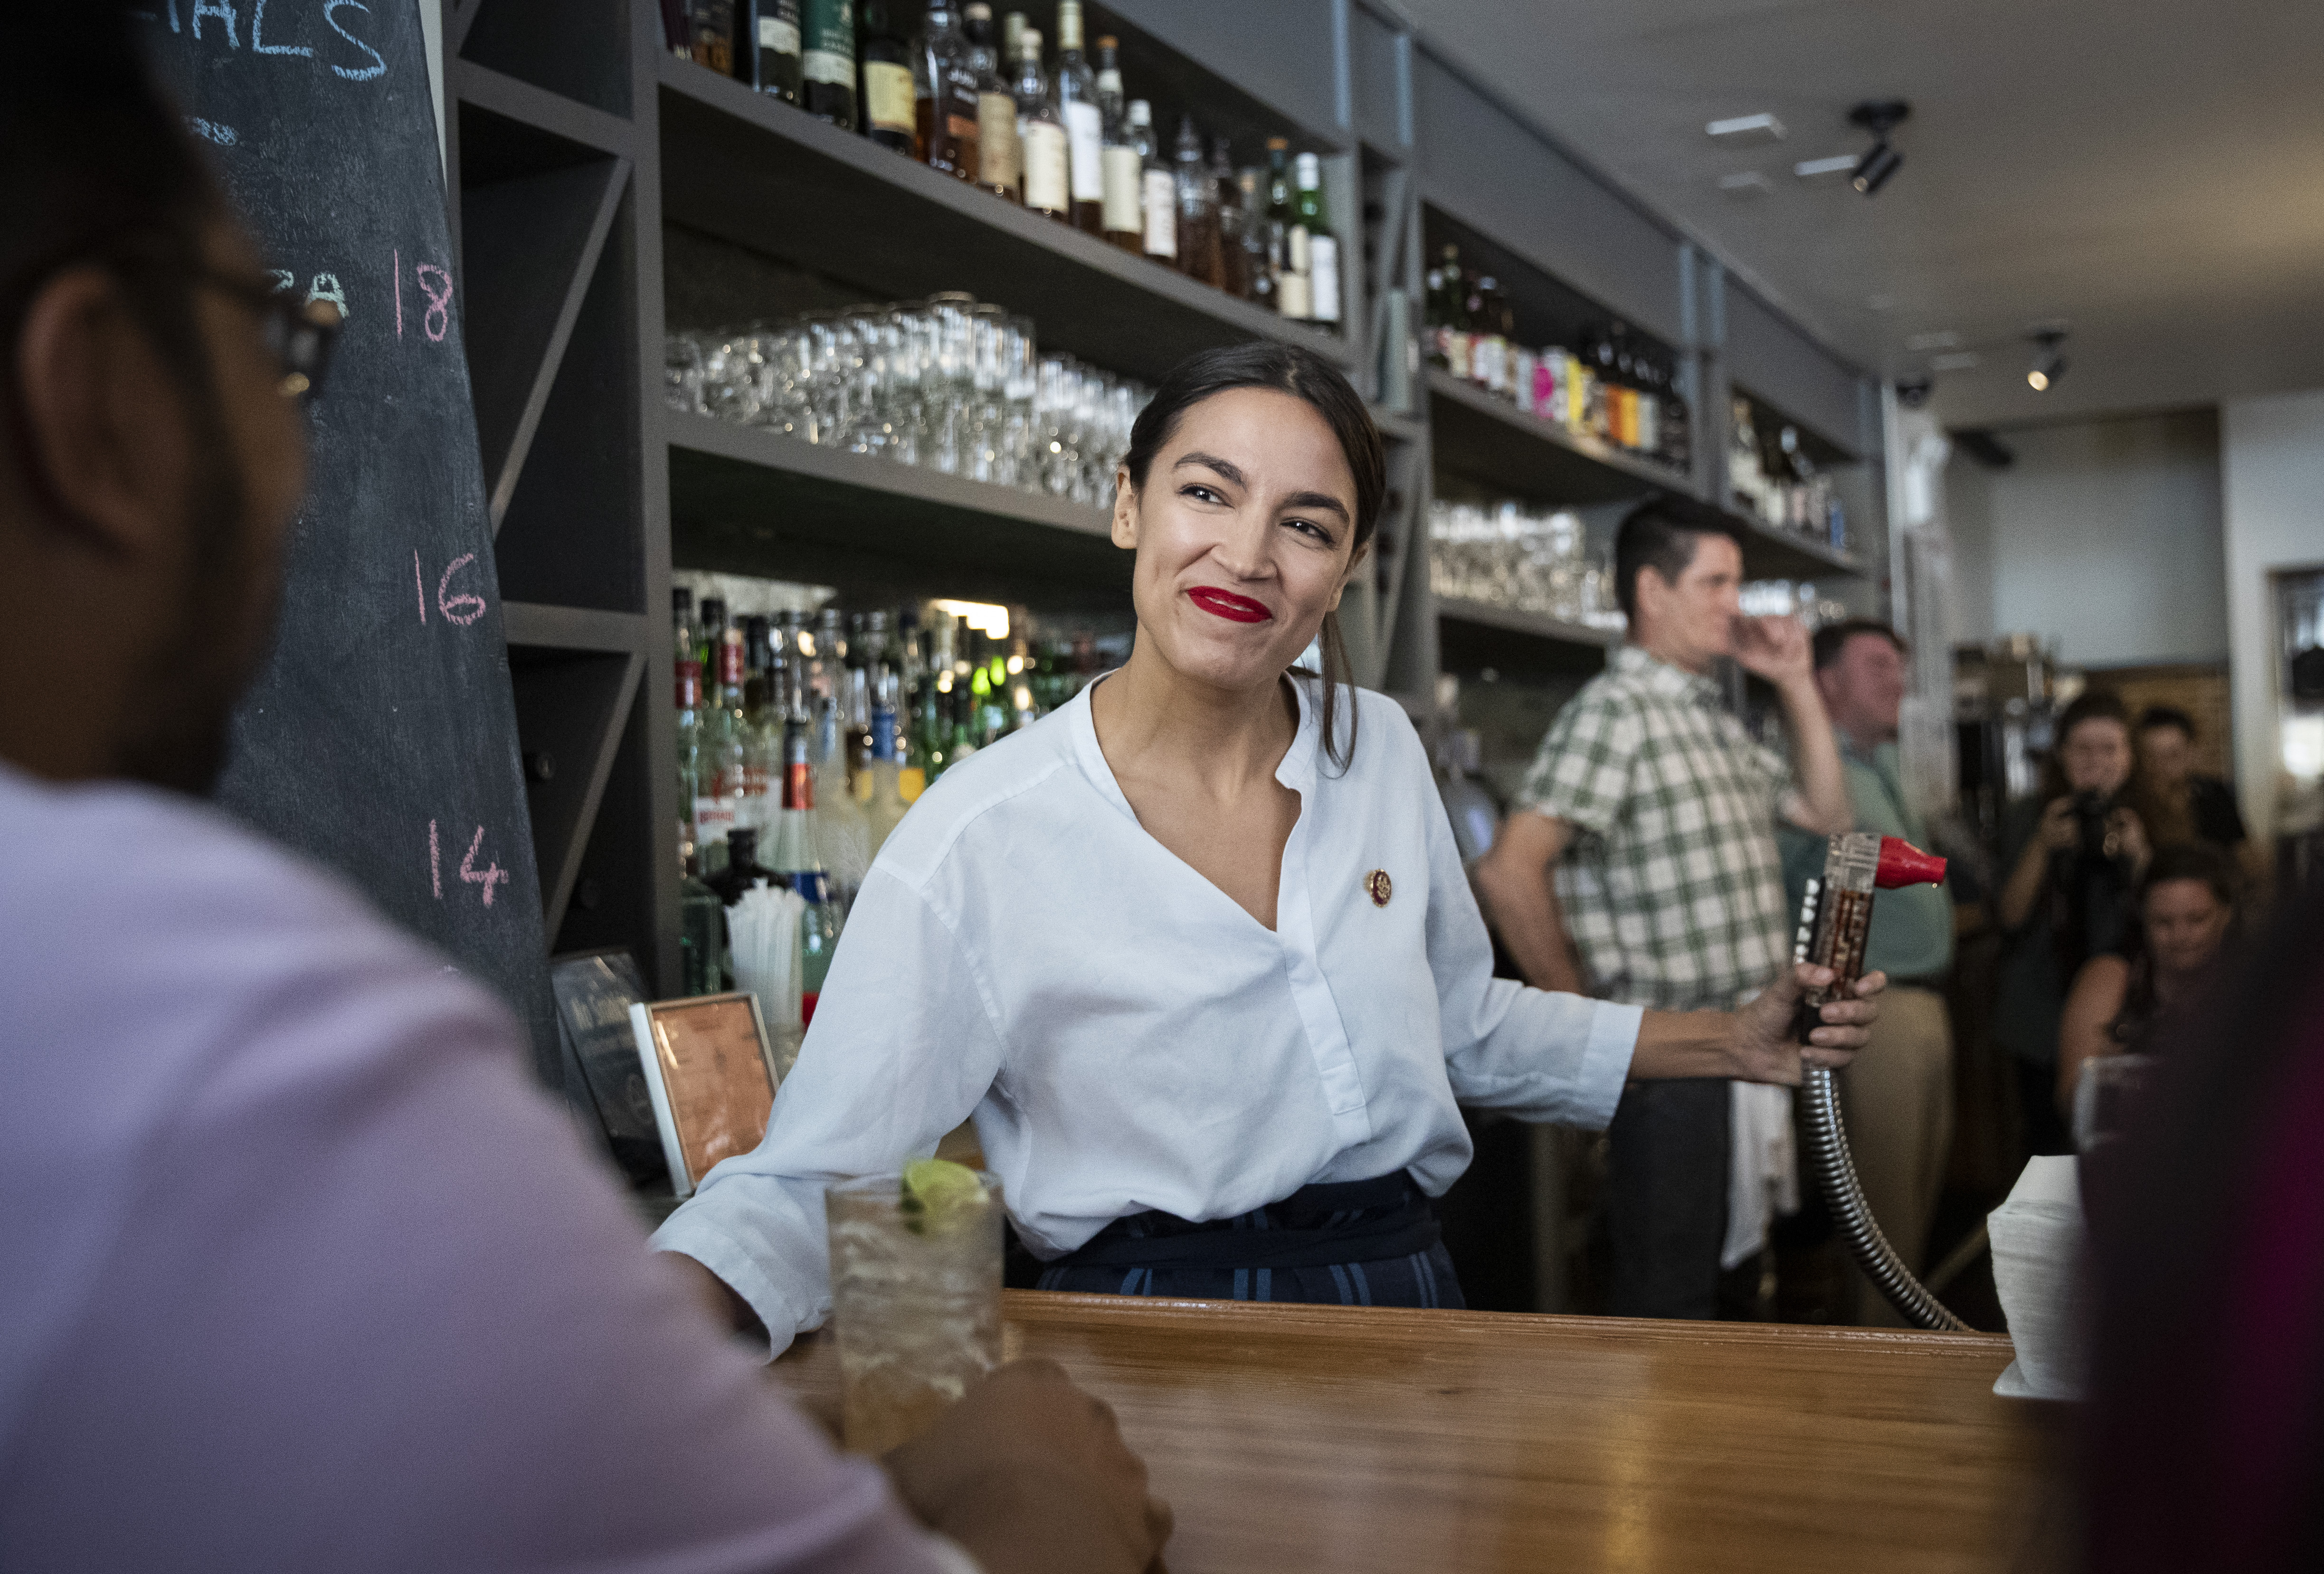 NEW YORK, NY - MAY 31: U.S. Rep. Alexandria Ocasio-Cortez (D-NY) works behind the bar at the Queensboro Restaurant, May 31, 2019 in the Queens borough of New York City. Ocasio-Cortez participated in an event to raise awareness for the One Fair Wage campaign, which calls to raise the minimum wage for tipped workers to a full minimum wage at the federal level. (Photo by Drew Angerer/Getty Images)